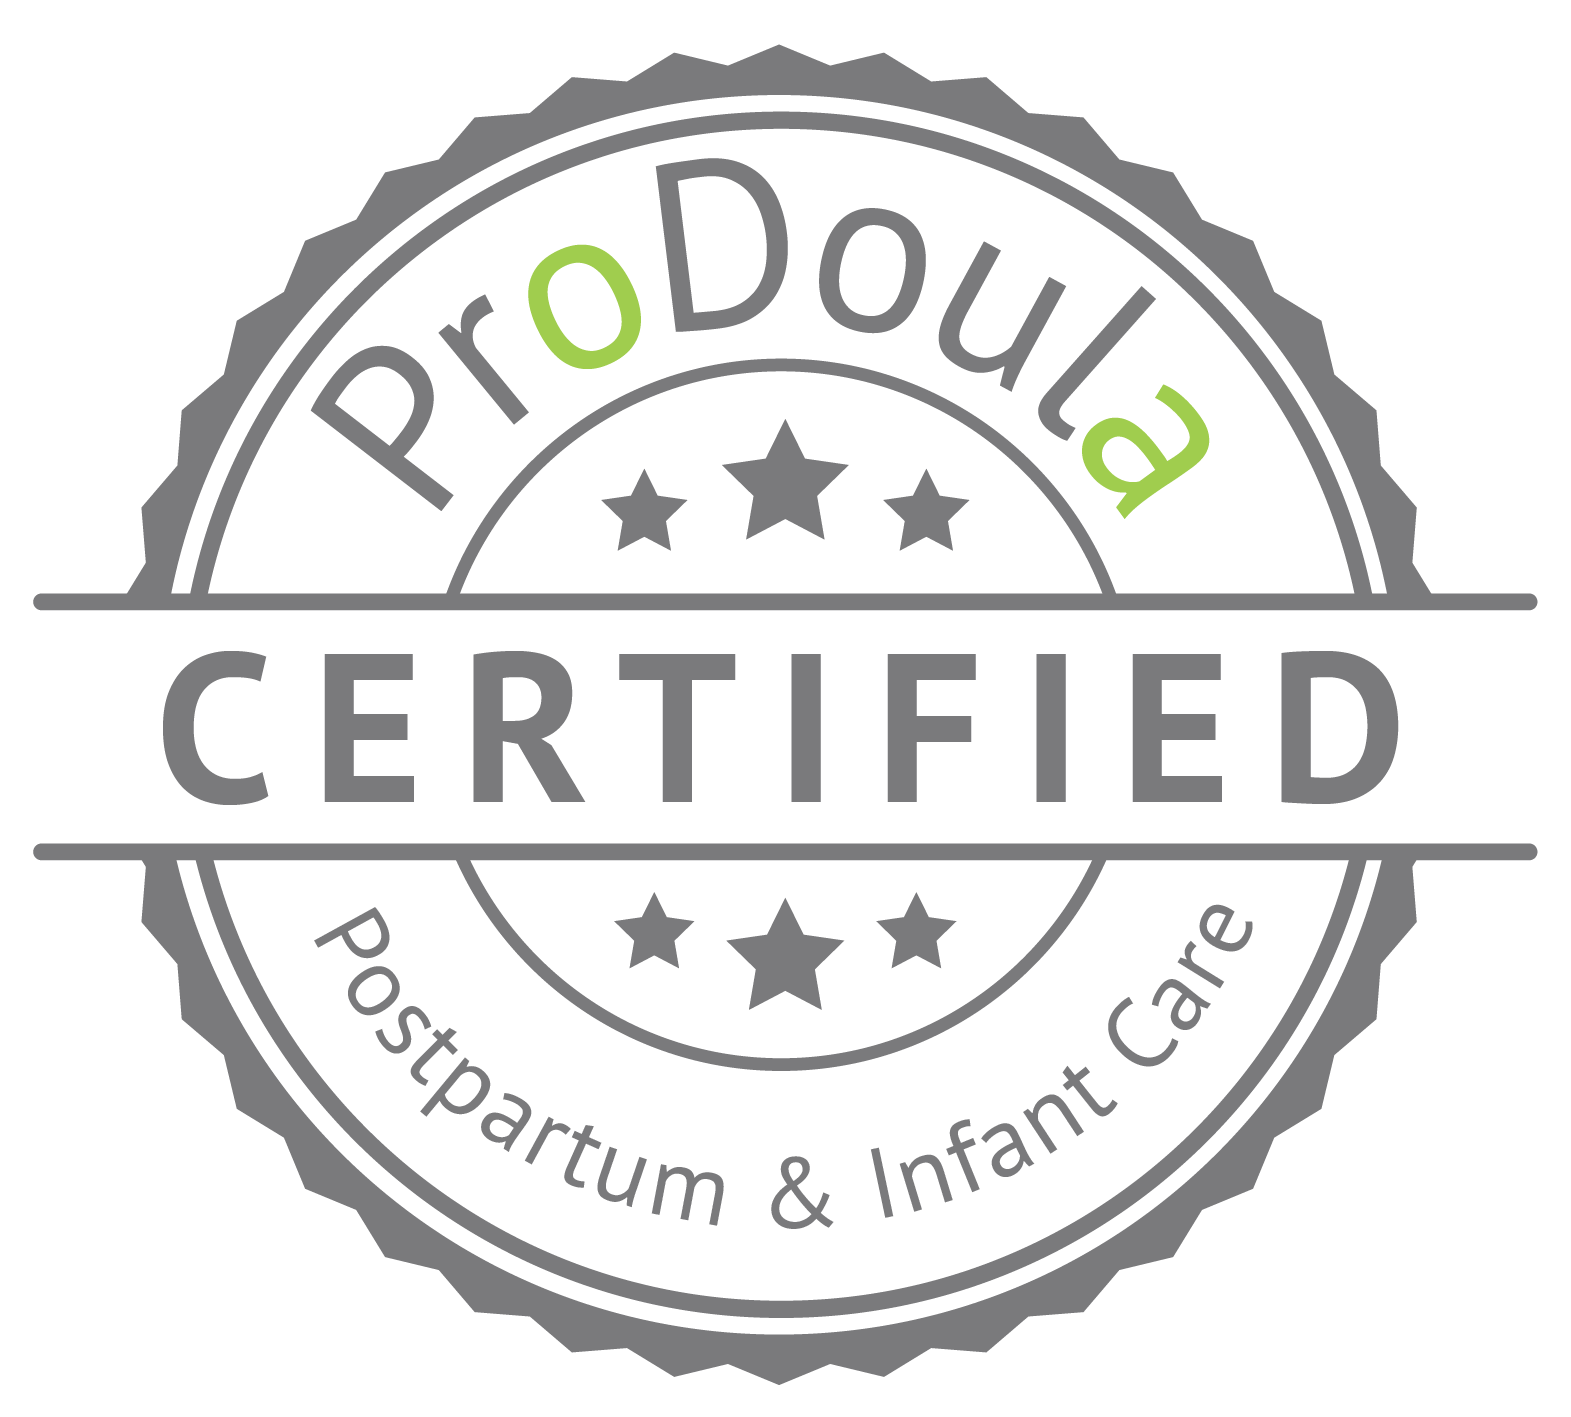 P&ICDcertified.png